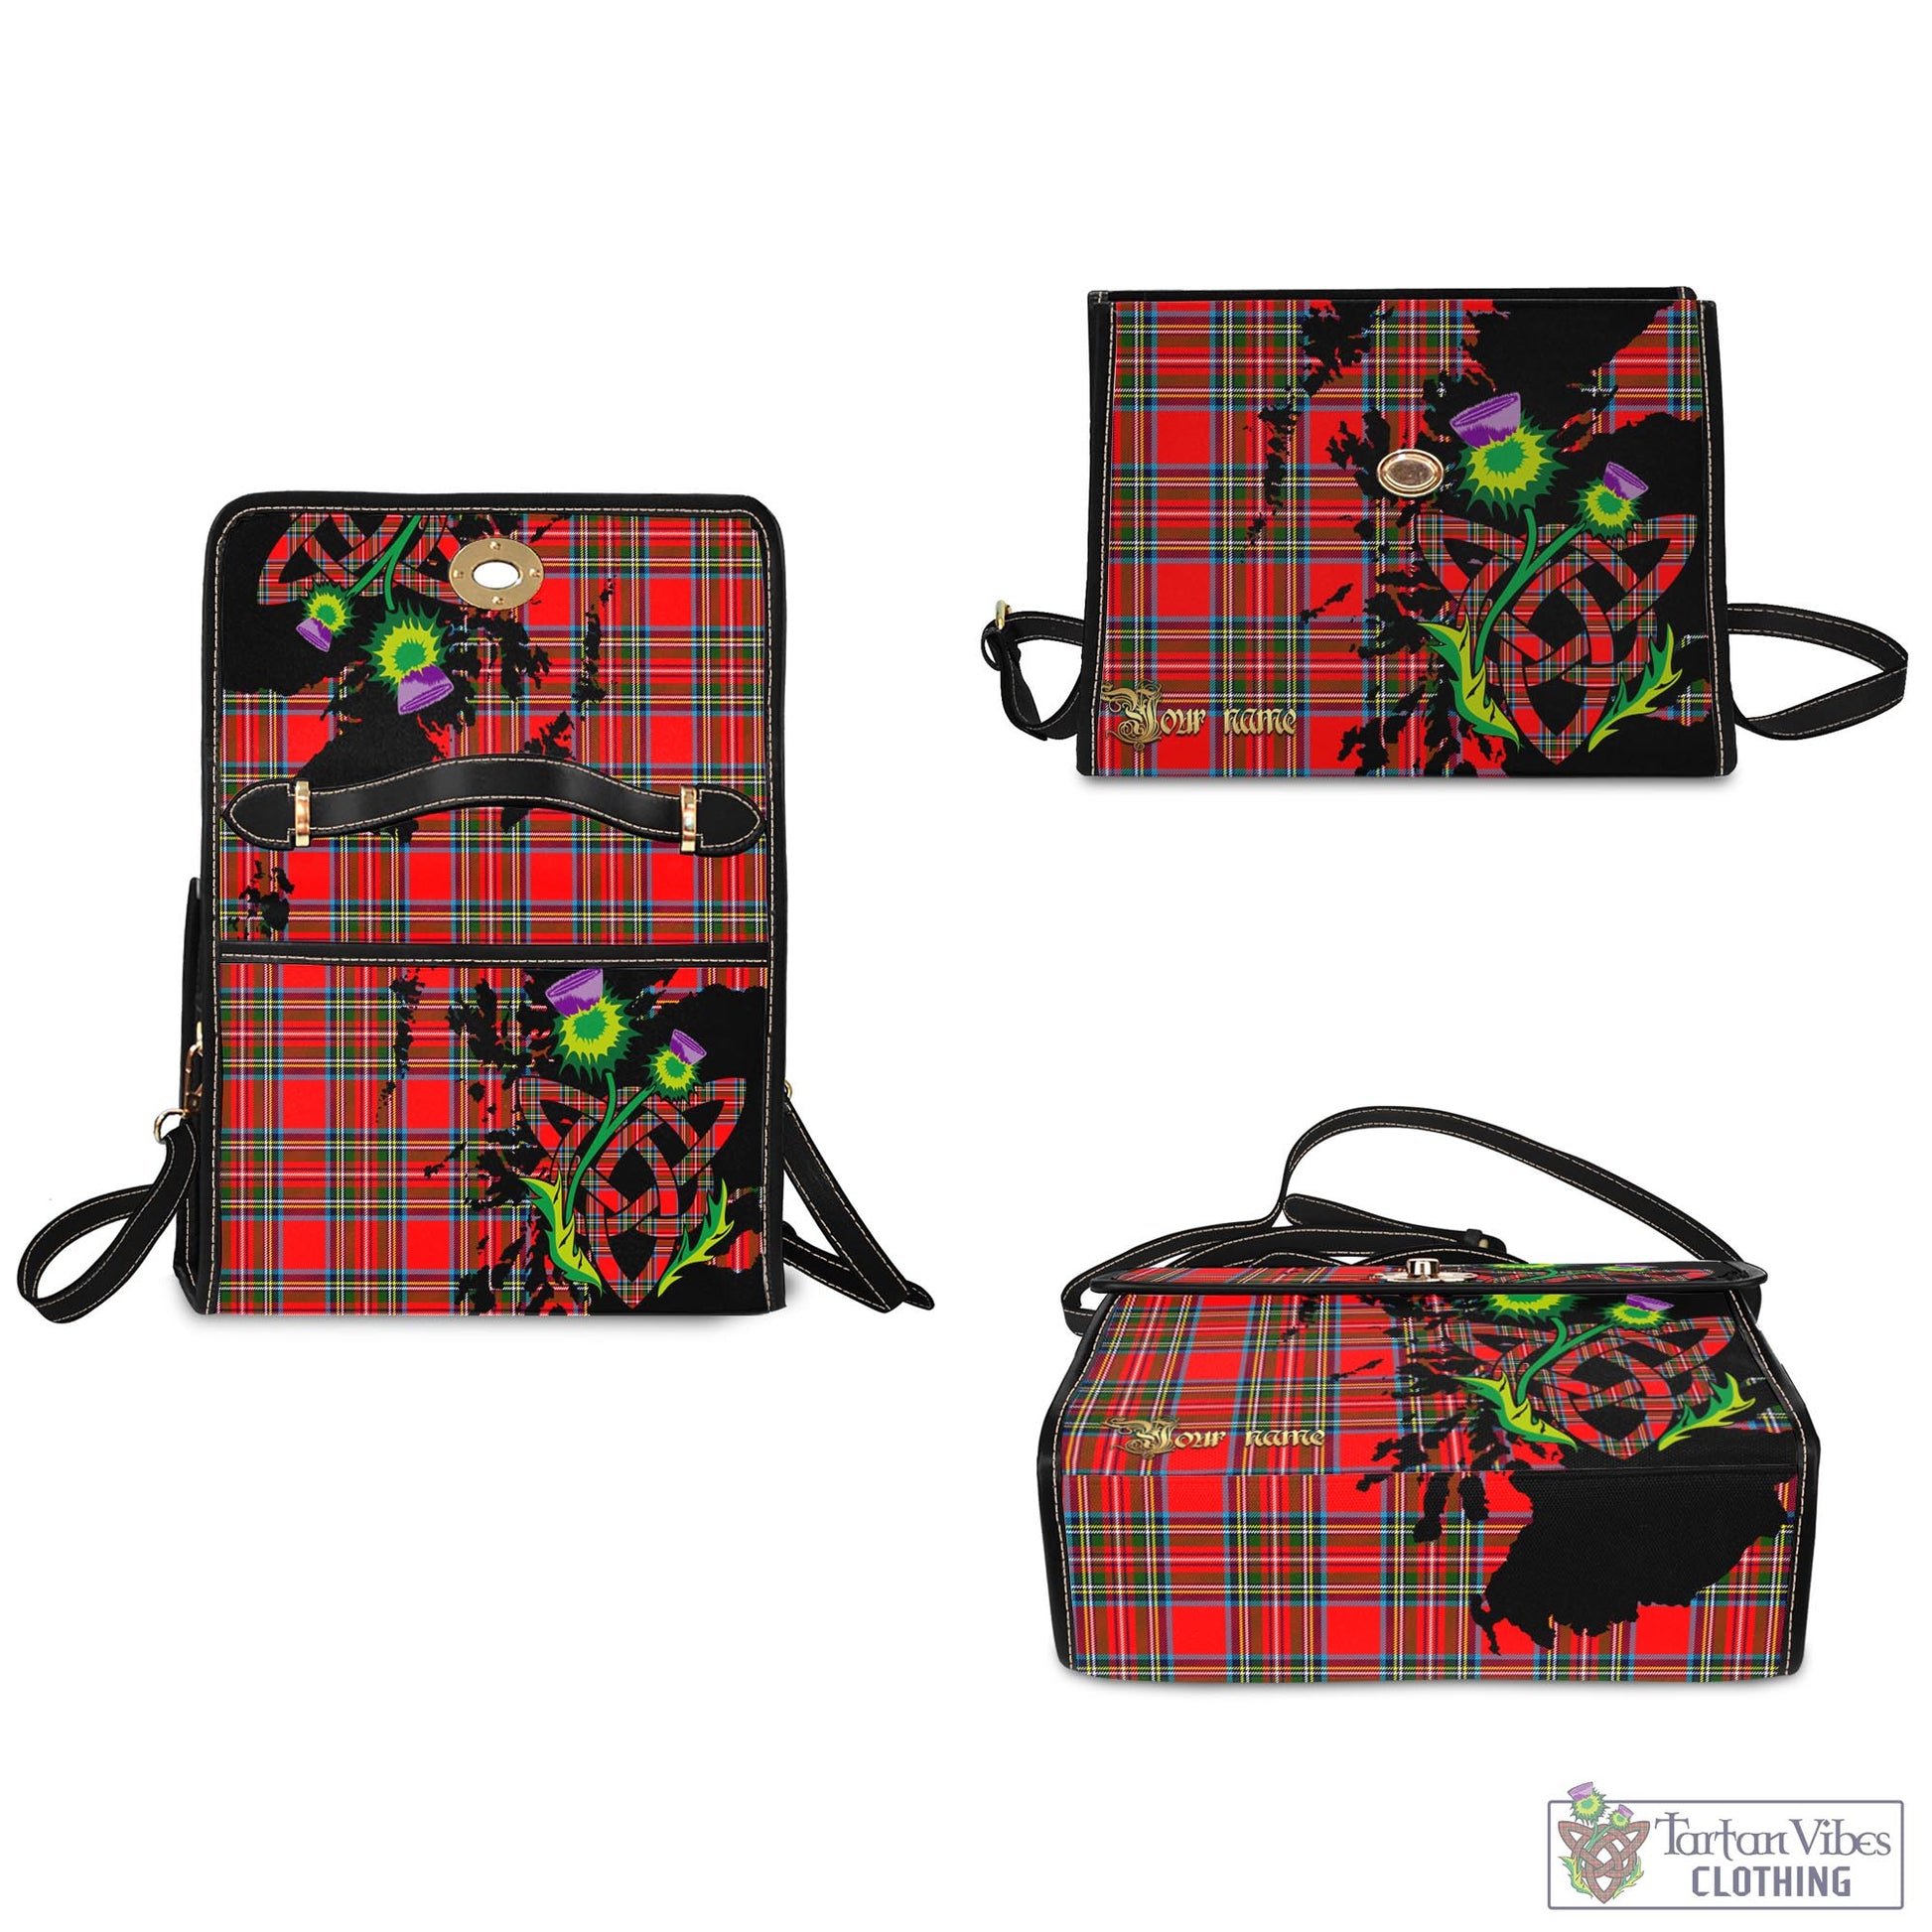 Tartan Vibes Clothing Stewart Royal Tartan Waterproof Canvas Bag with Scotland Map and Thistle Celtic Accents